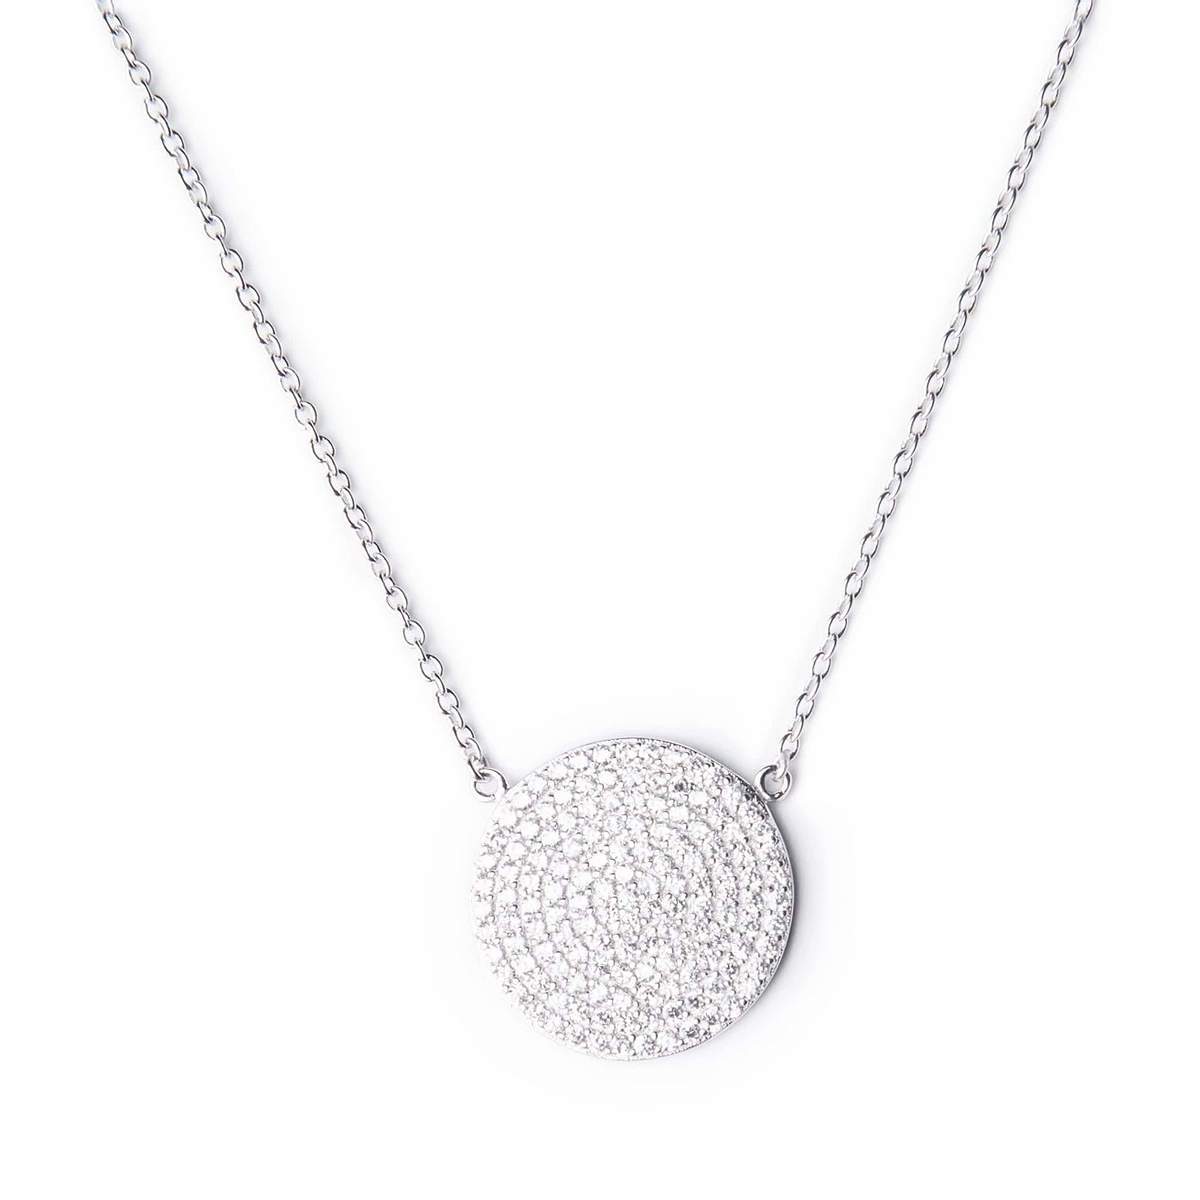 Pave Disk Necklace